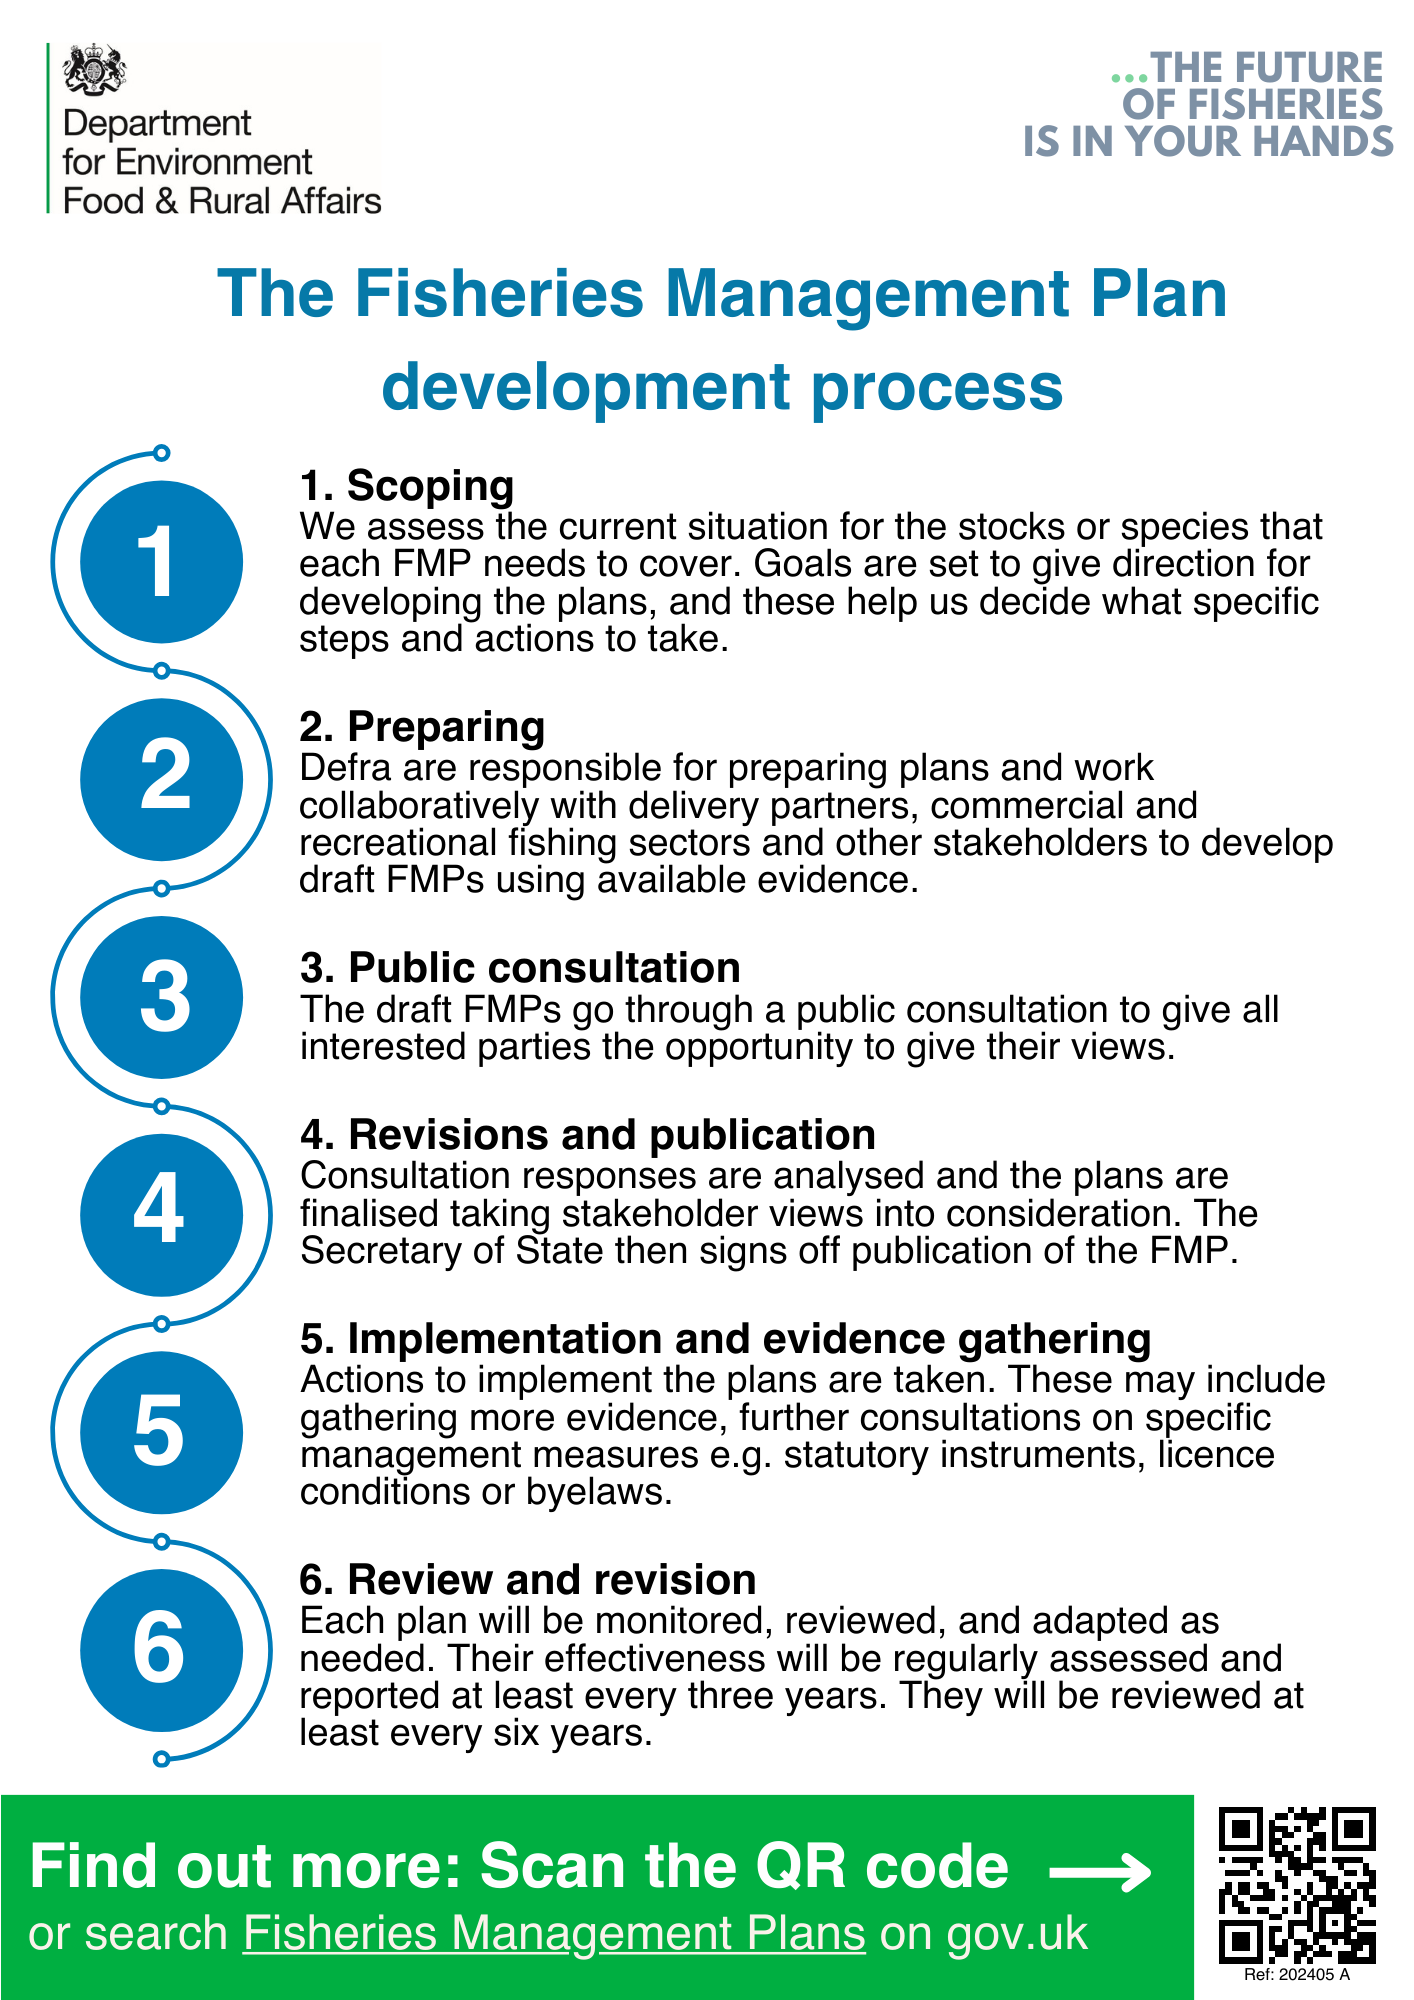 Infographic showing the FMP process from scoping through to publication and review.